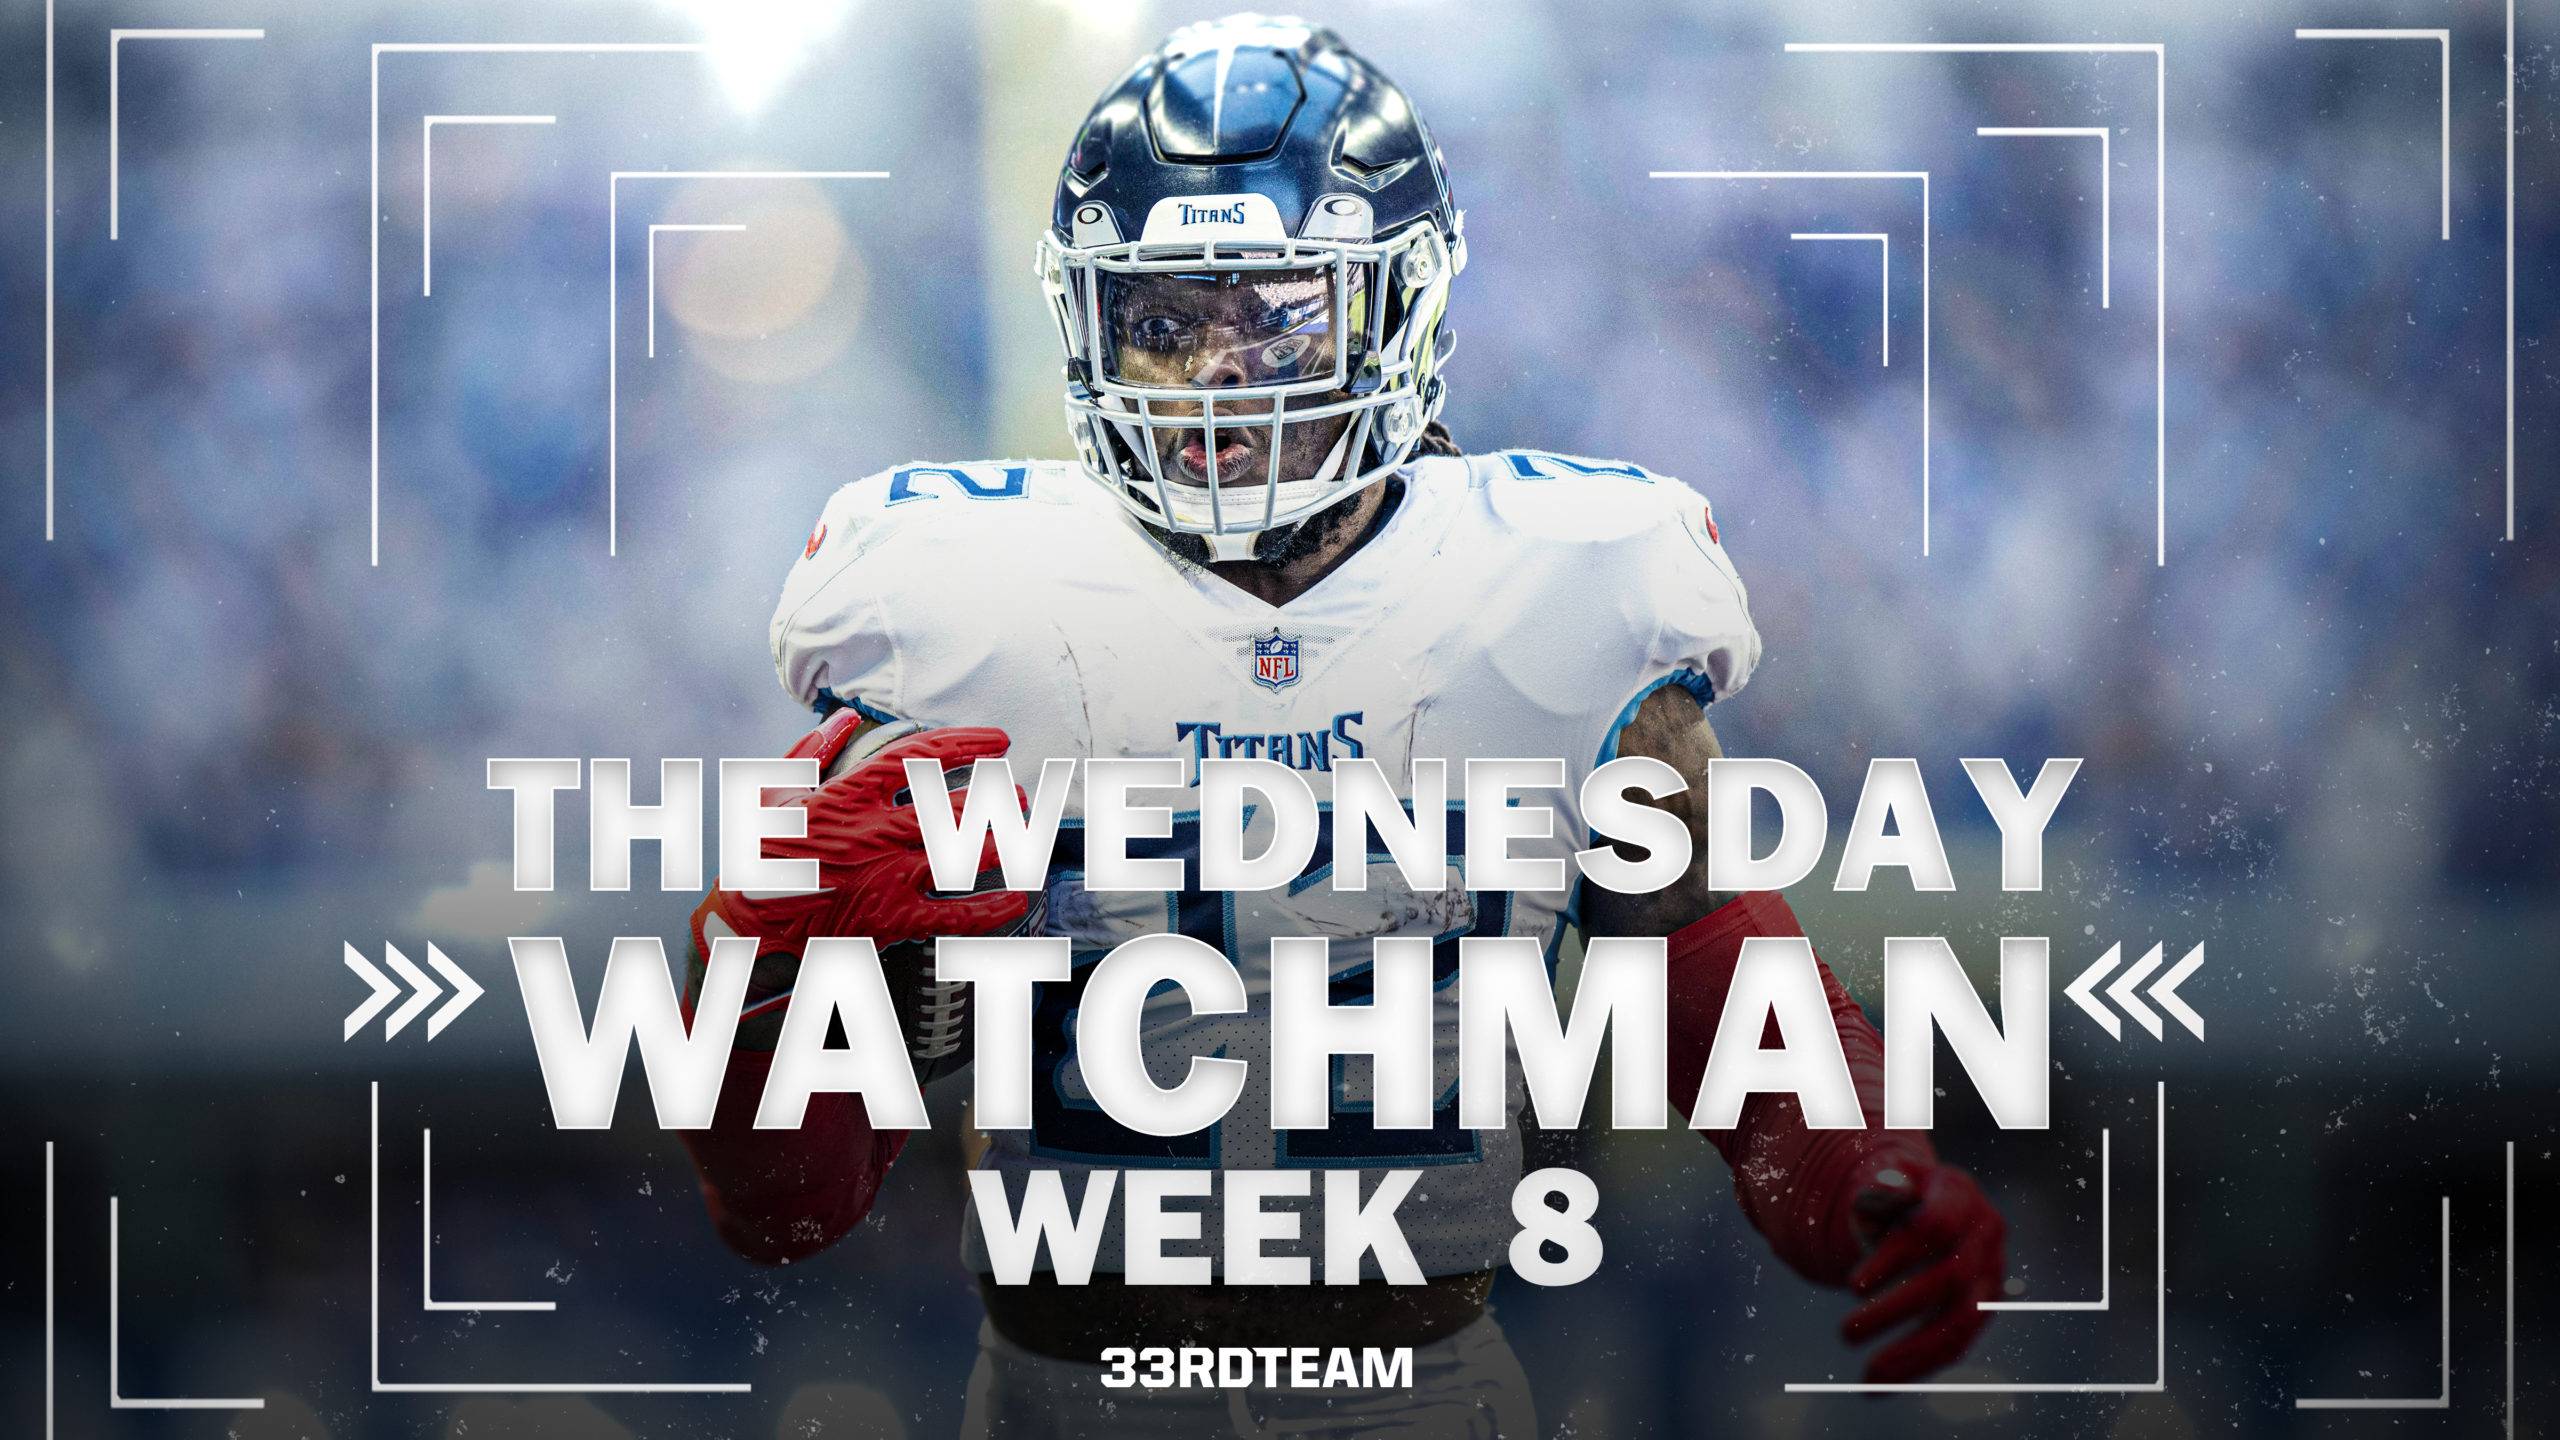 The Wednesday Watchman: NFL Week 8 Betting, DFS and Fantasy Information to Know